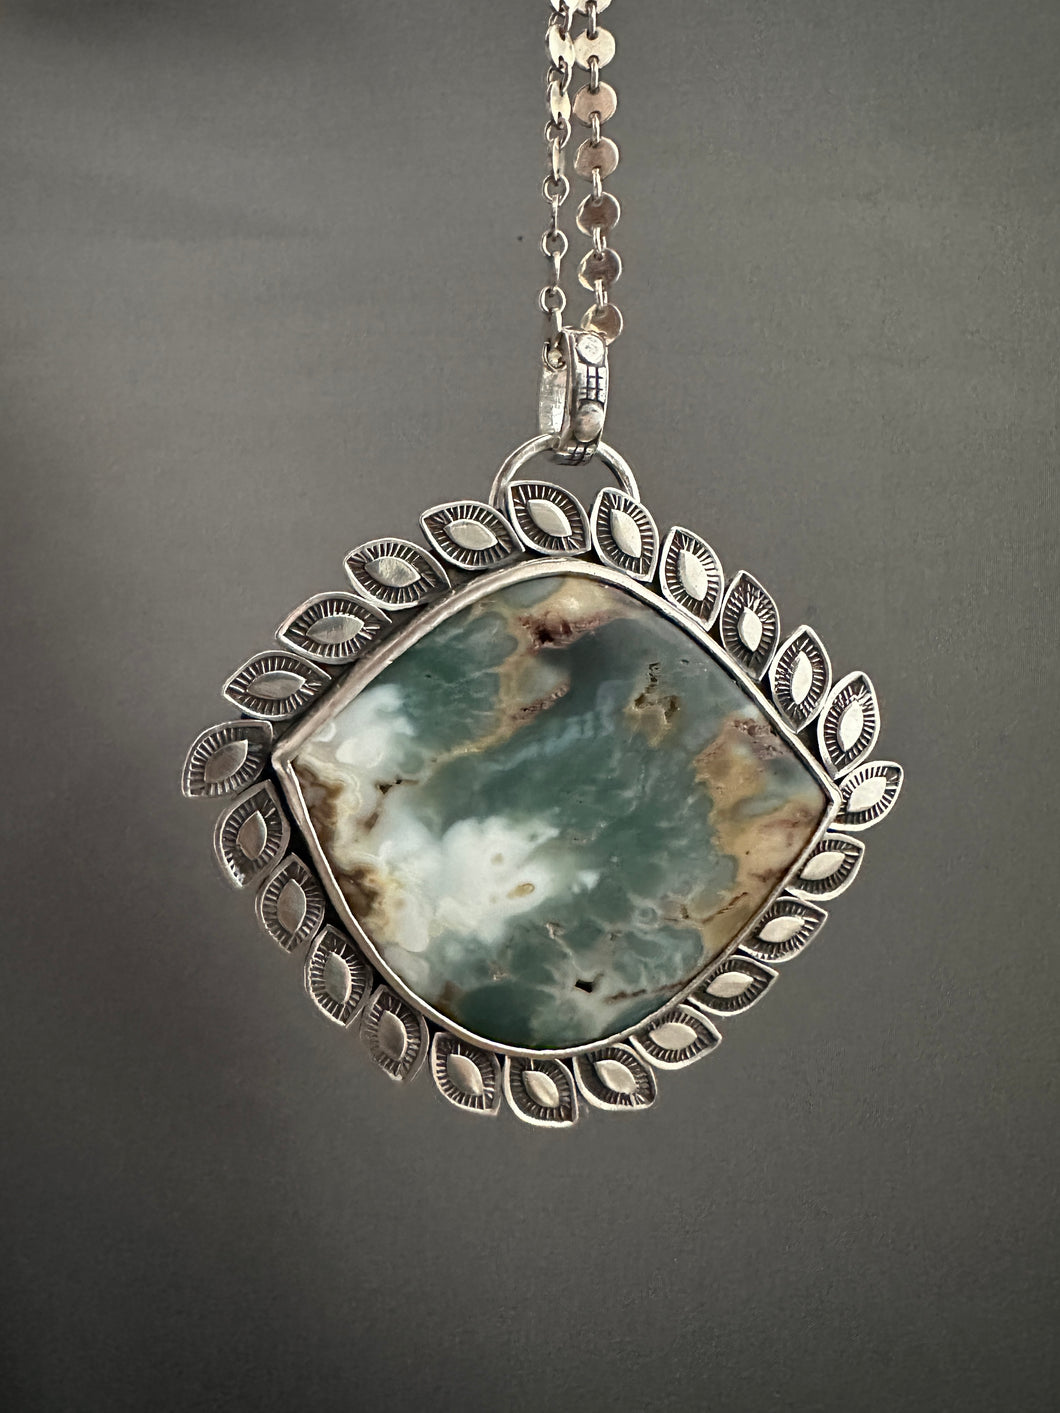 Large Prudent Heart Agate Pendant